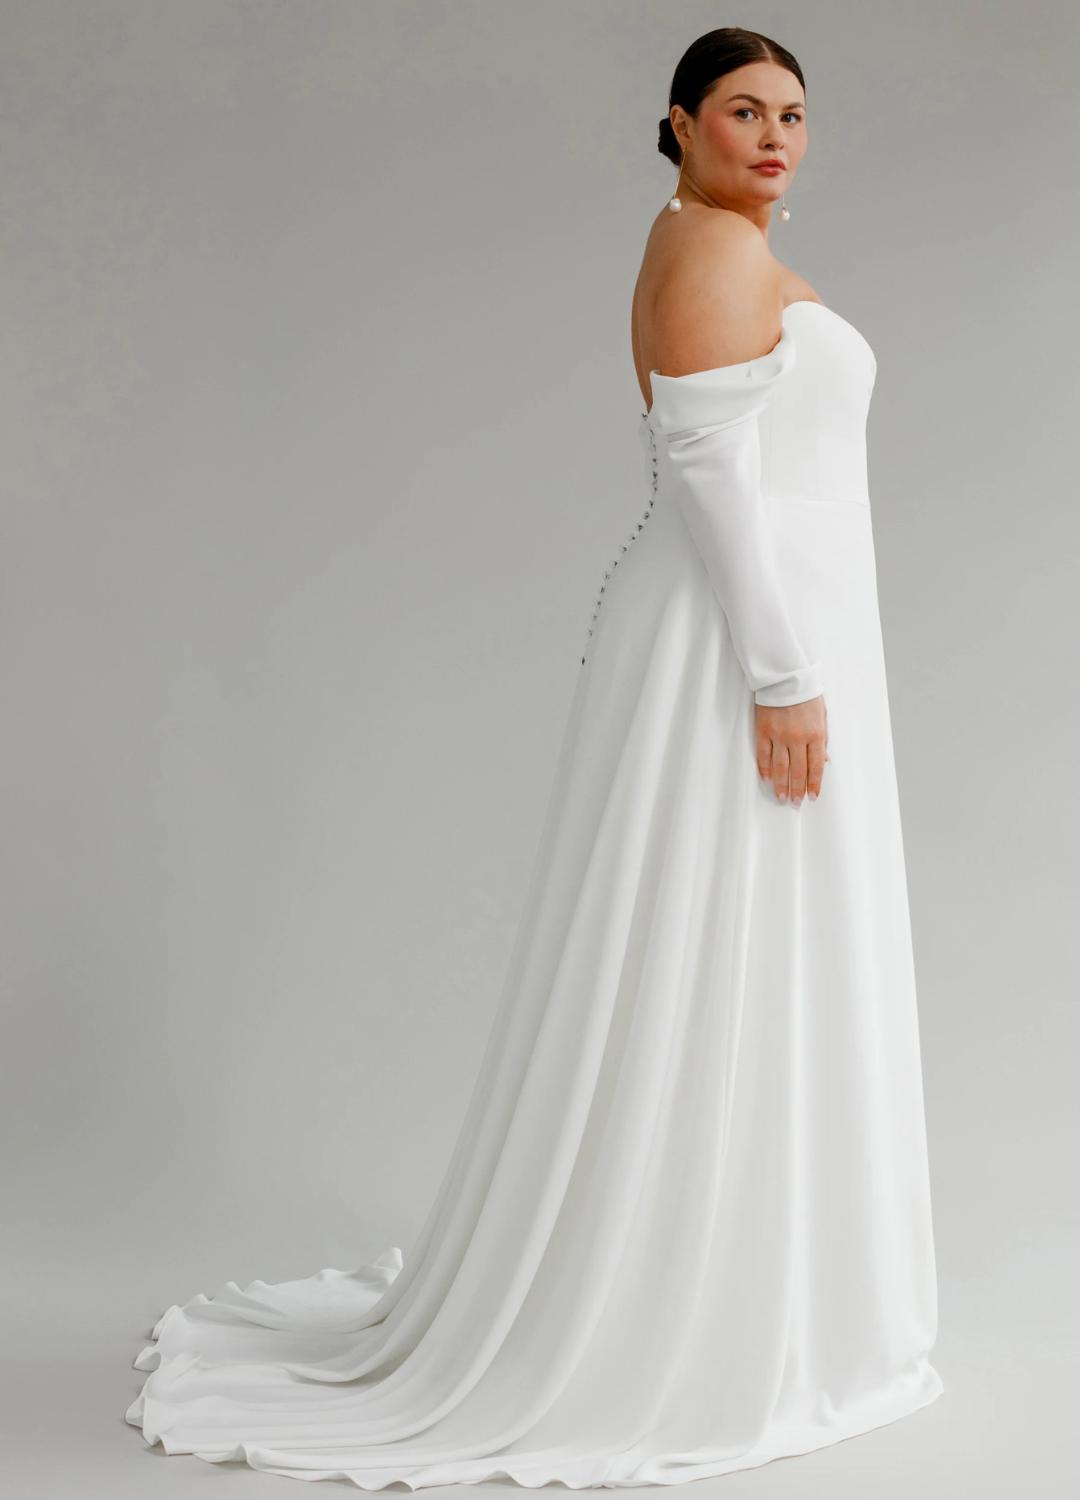 8 Simple and Chic Wedding Dresses for a Timeless Bride